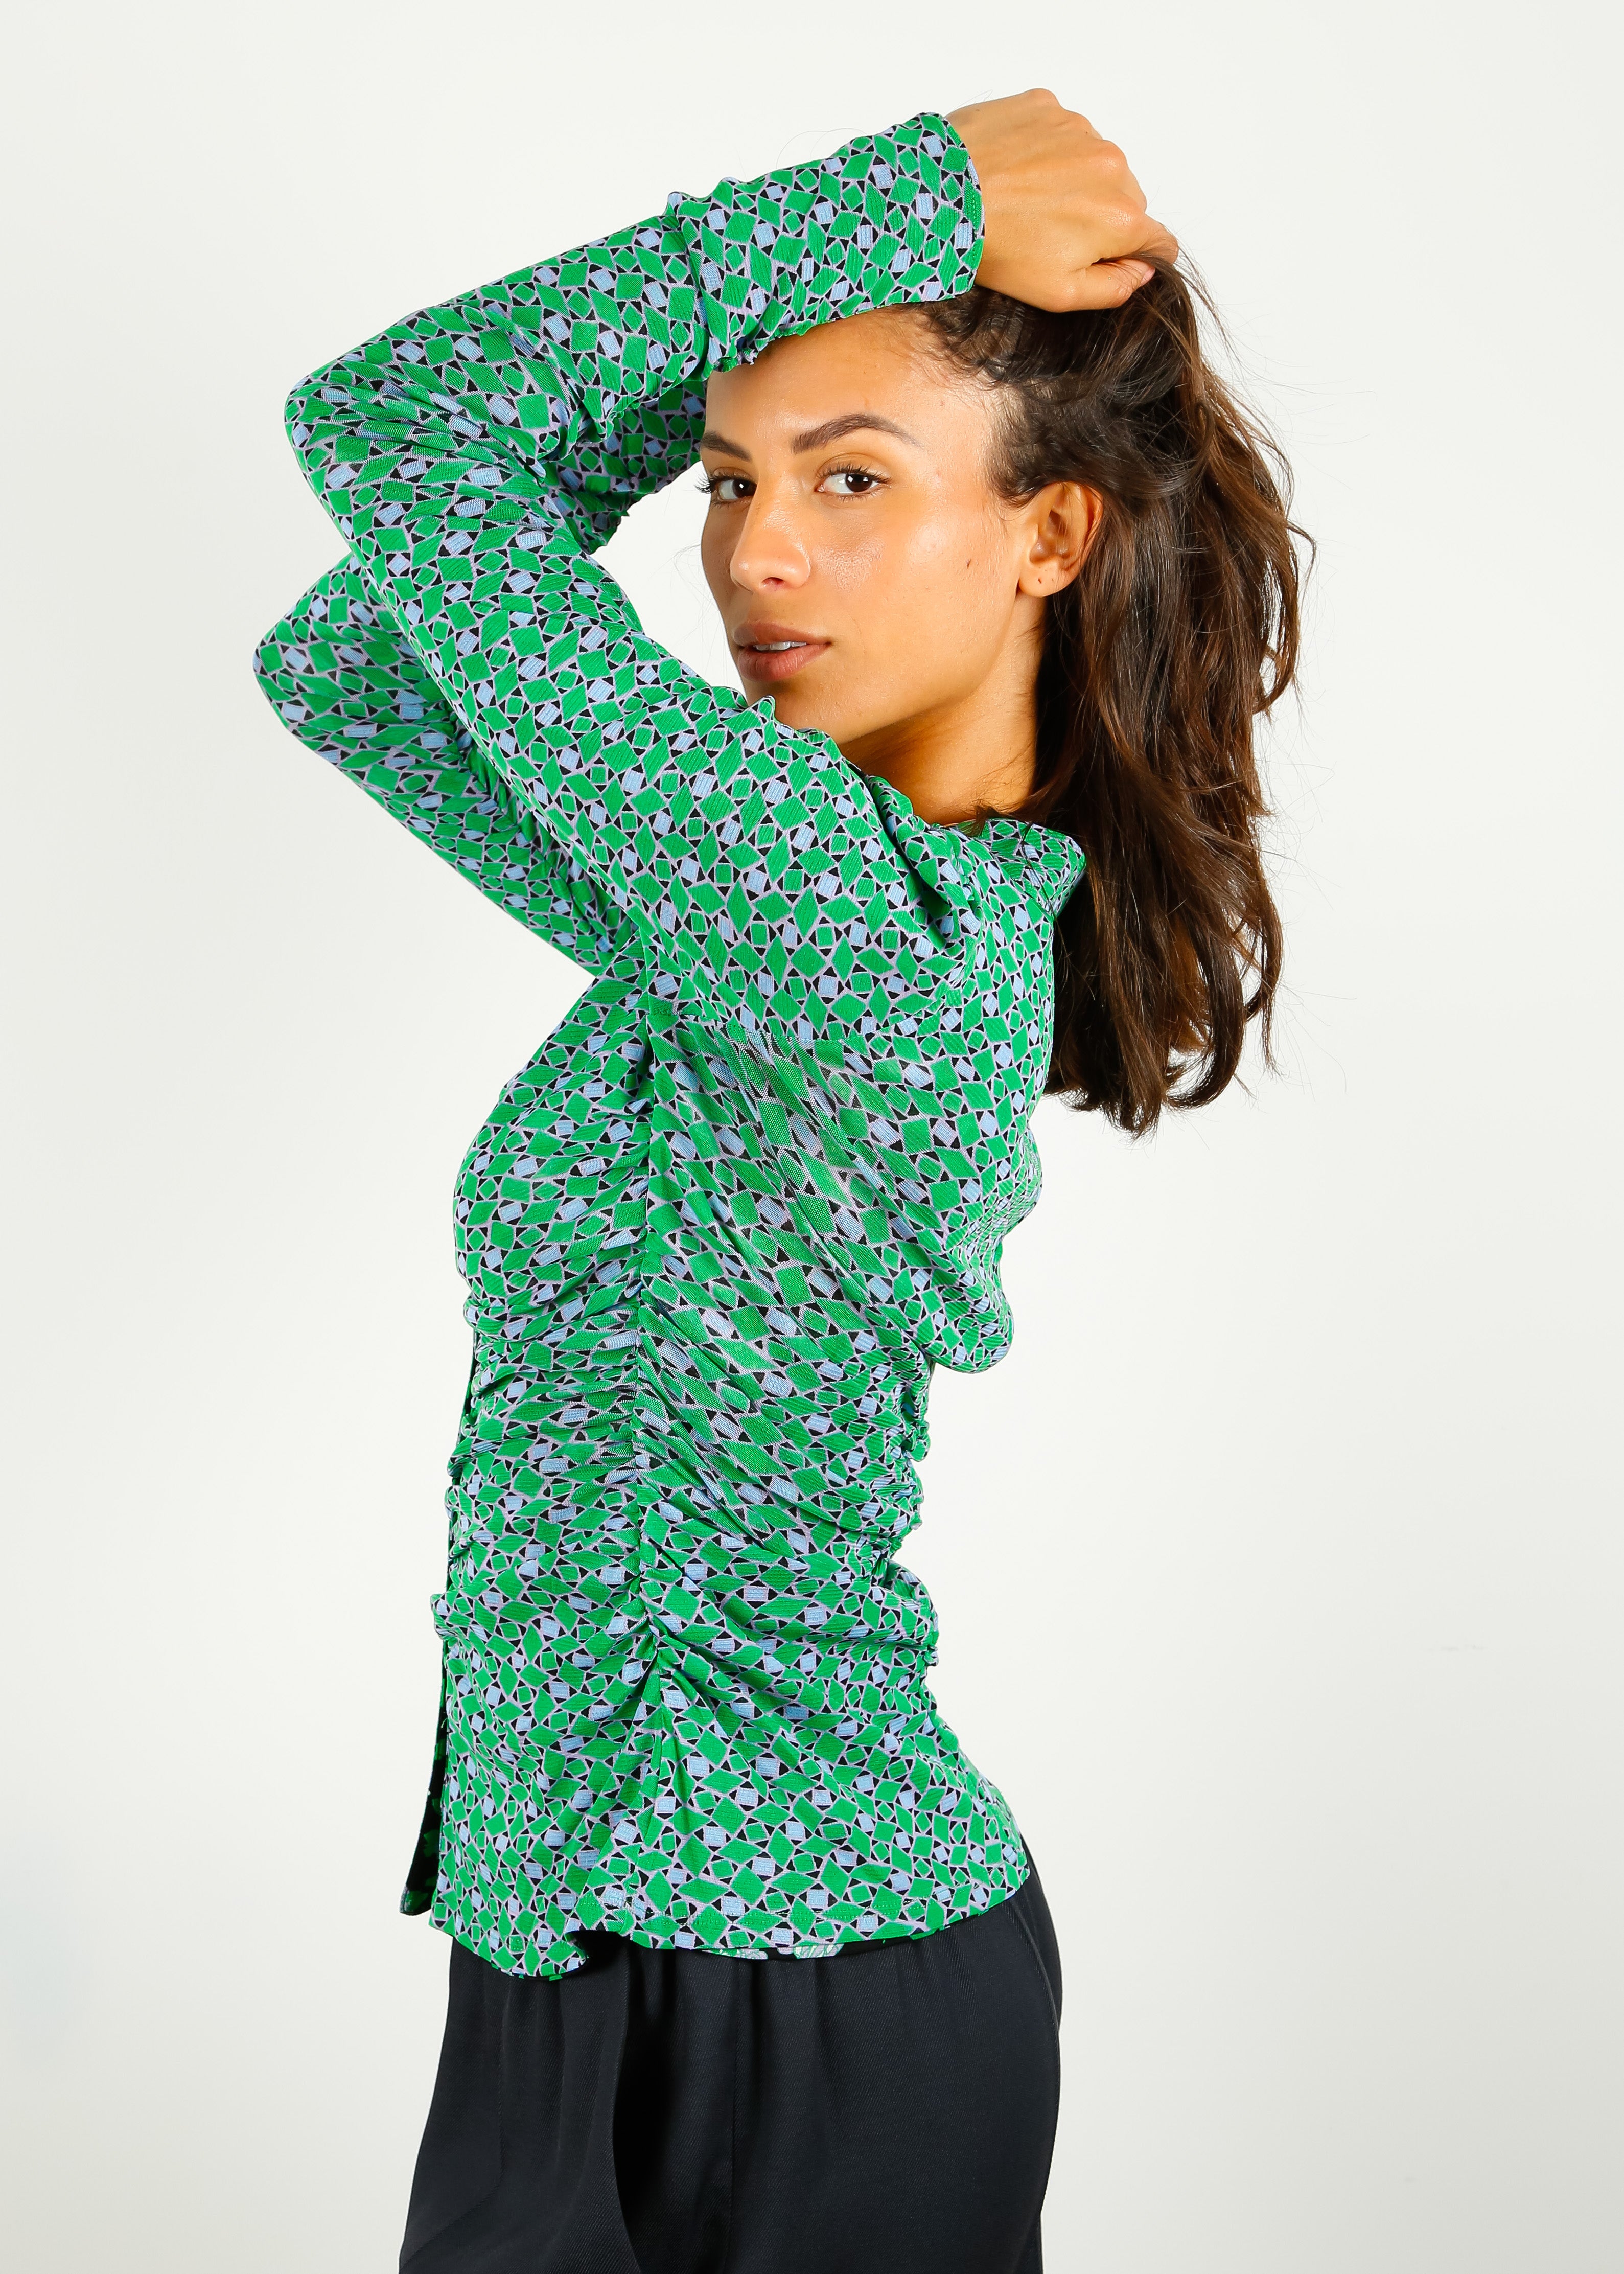 DVF Nathaniel Reversible Top in Dots Blossom,Venice Geo